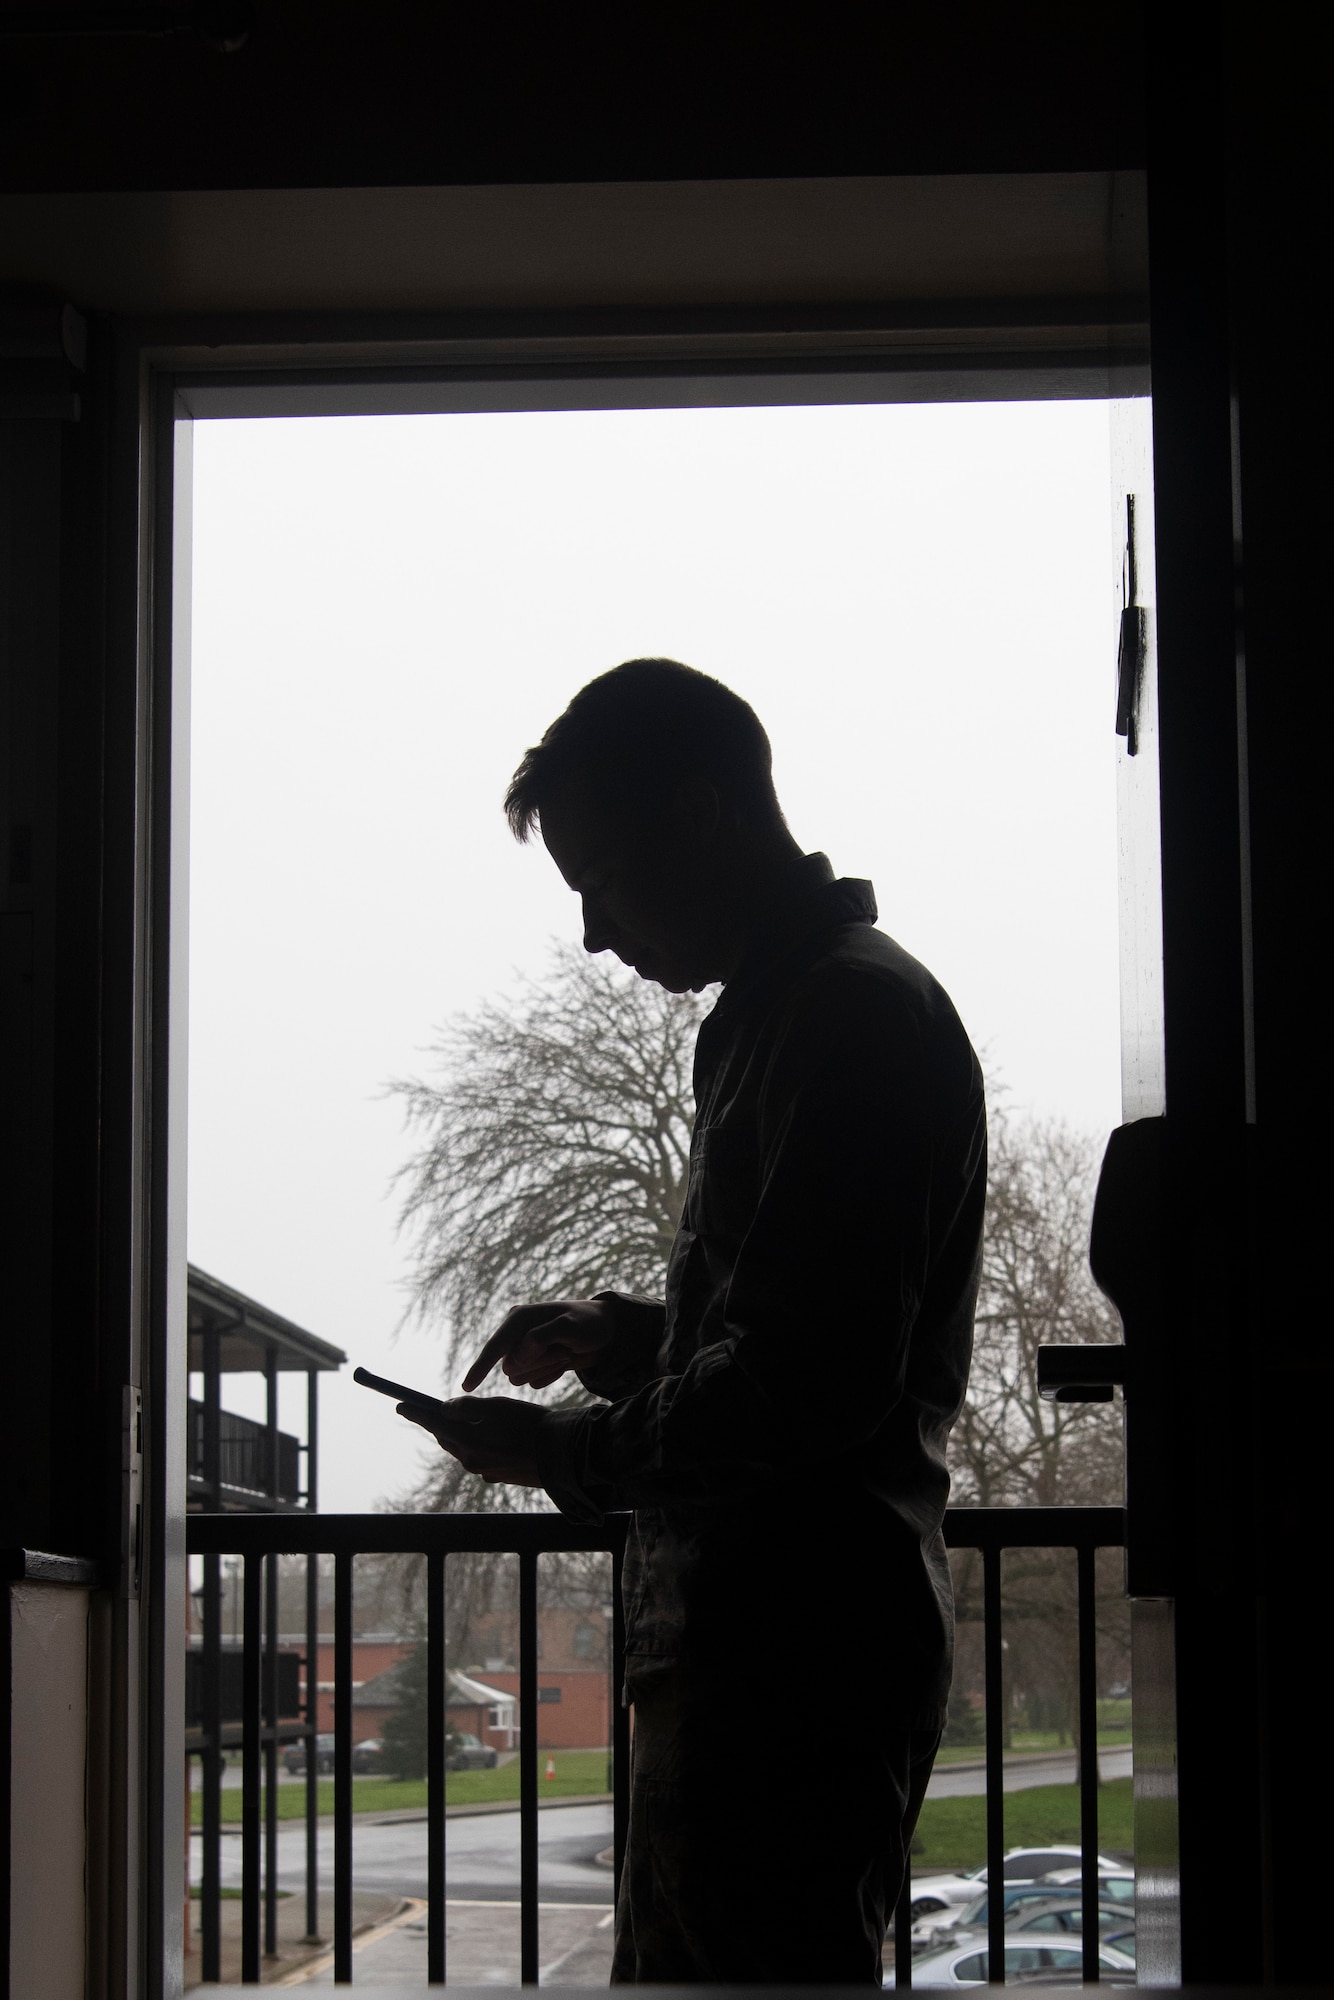 Airman Drake Koenig-Frederickson, 100th Aircraft Maintenance Squadron aerospace propulsion apprentice, submits a work order from his dorm room using the RAF Mildenhall Dormitory app at RAF Mildenhall, England, Dec. 17, 2019. Airmen were previously required to visit the Unaccompanied Housing Office to submit work orders, but they can now request maintenance on their room from a cell phone. (U.S. Air Force photo by Airman 1st Class Joseph Barron)